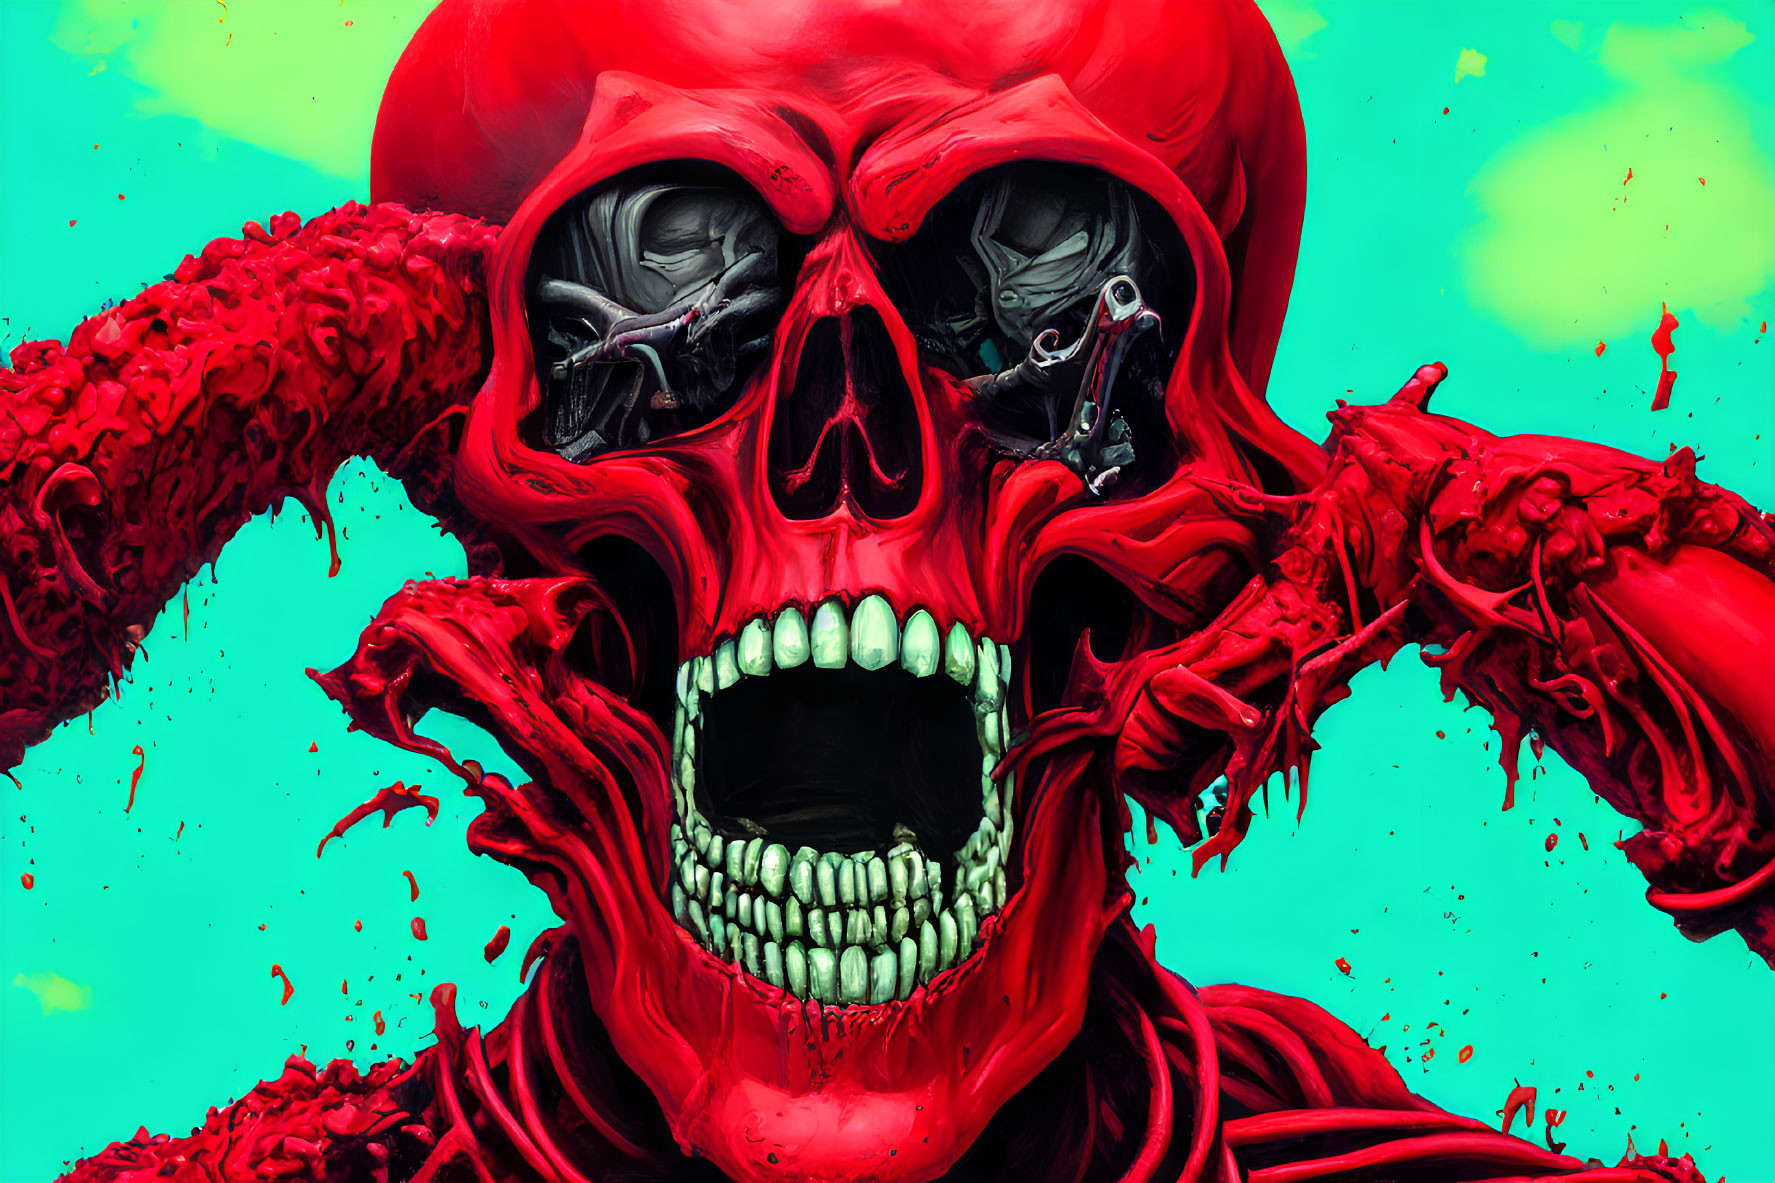 Digital Artwork: Red Skull with Humanoid Figures on Turquoise Background